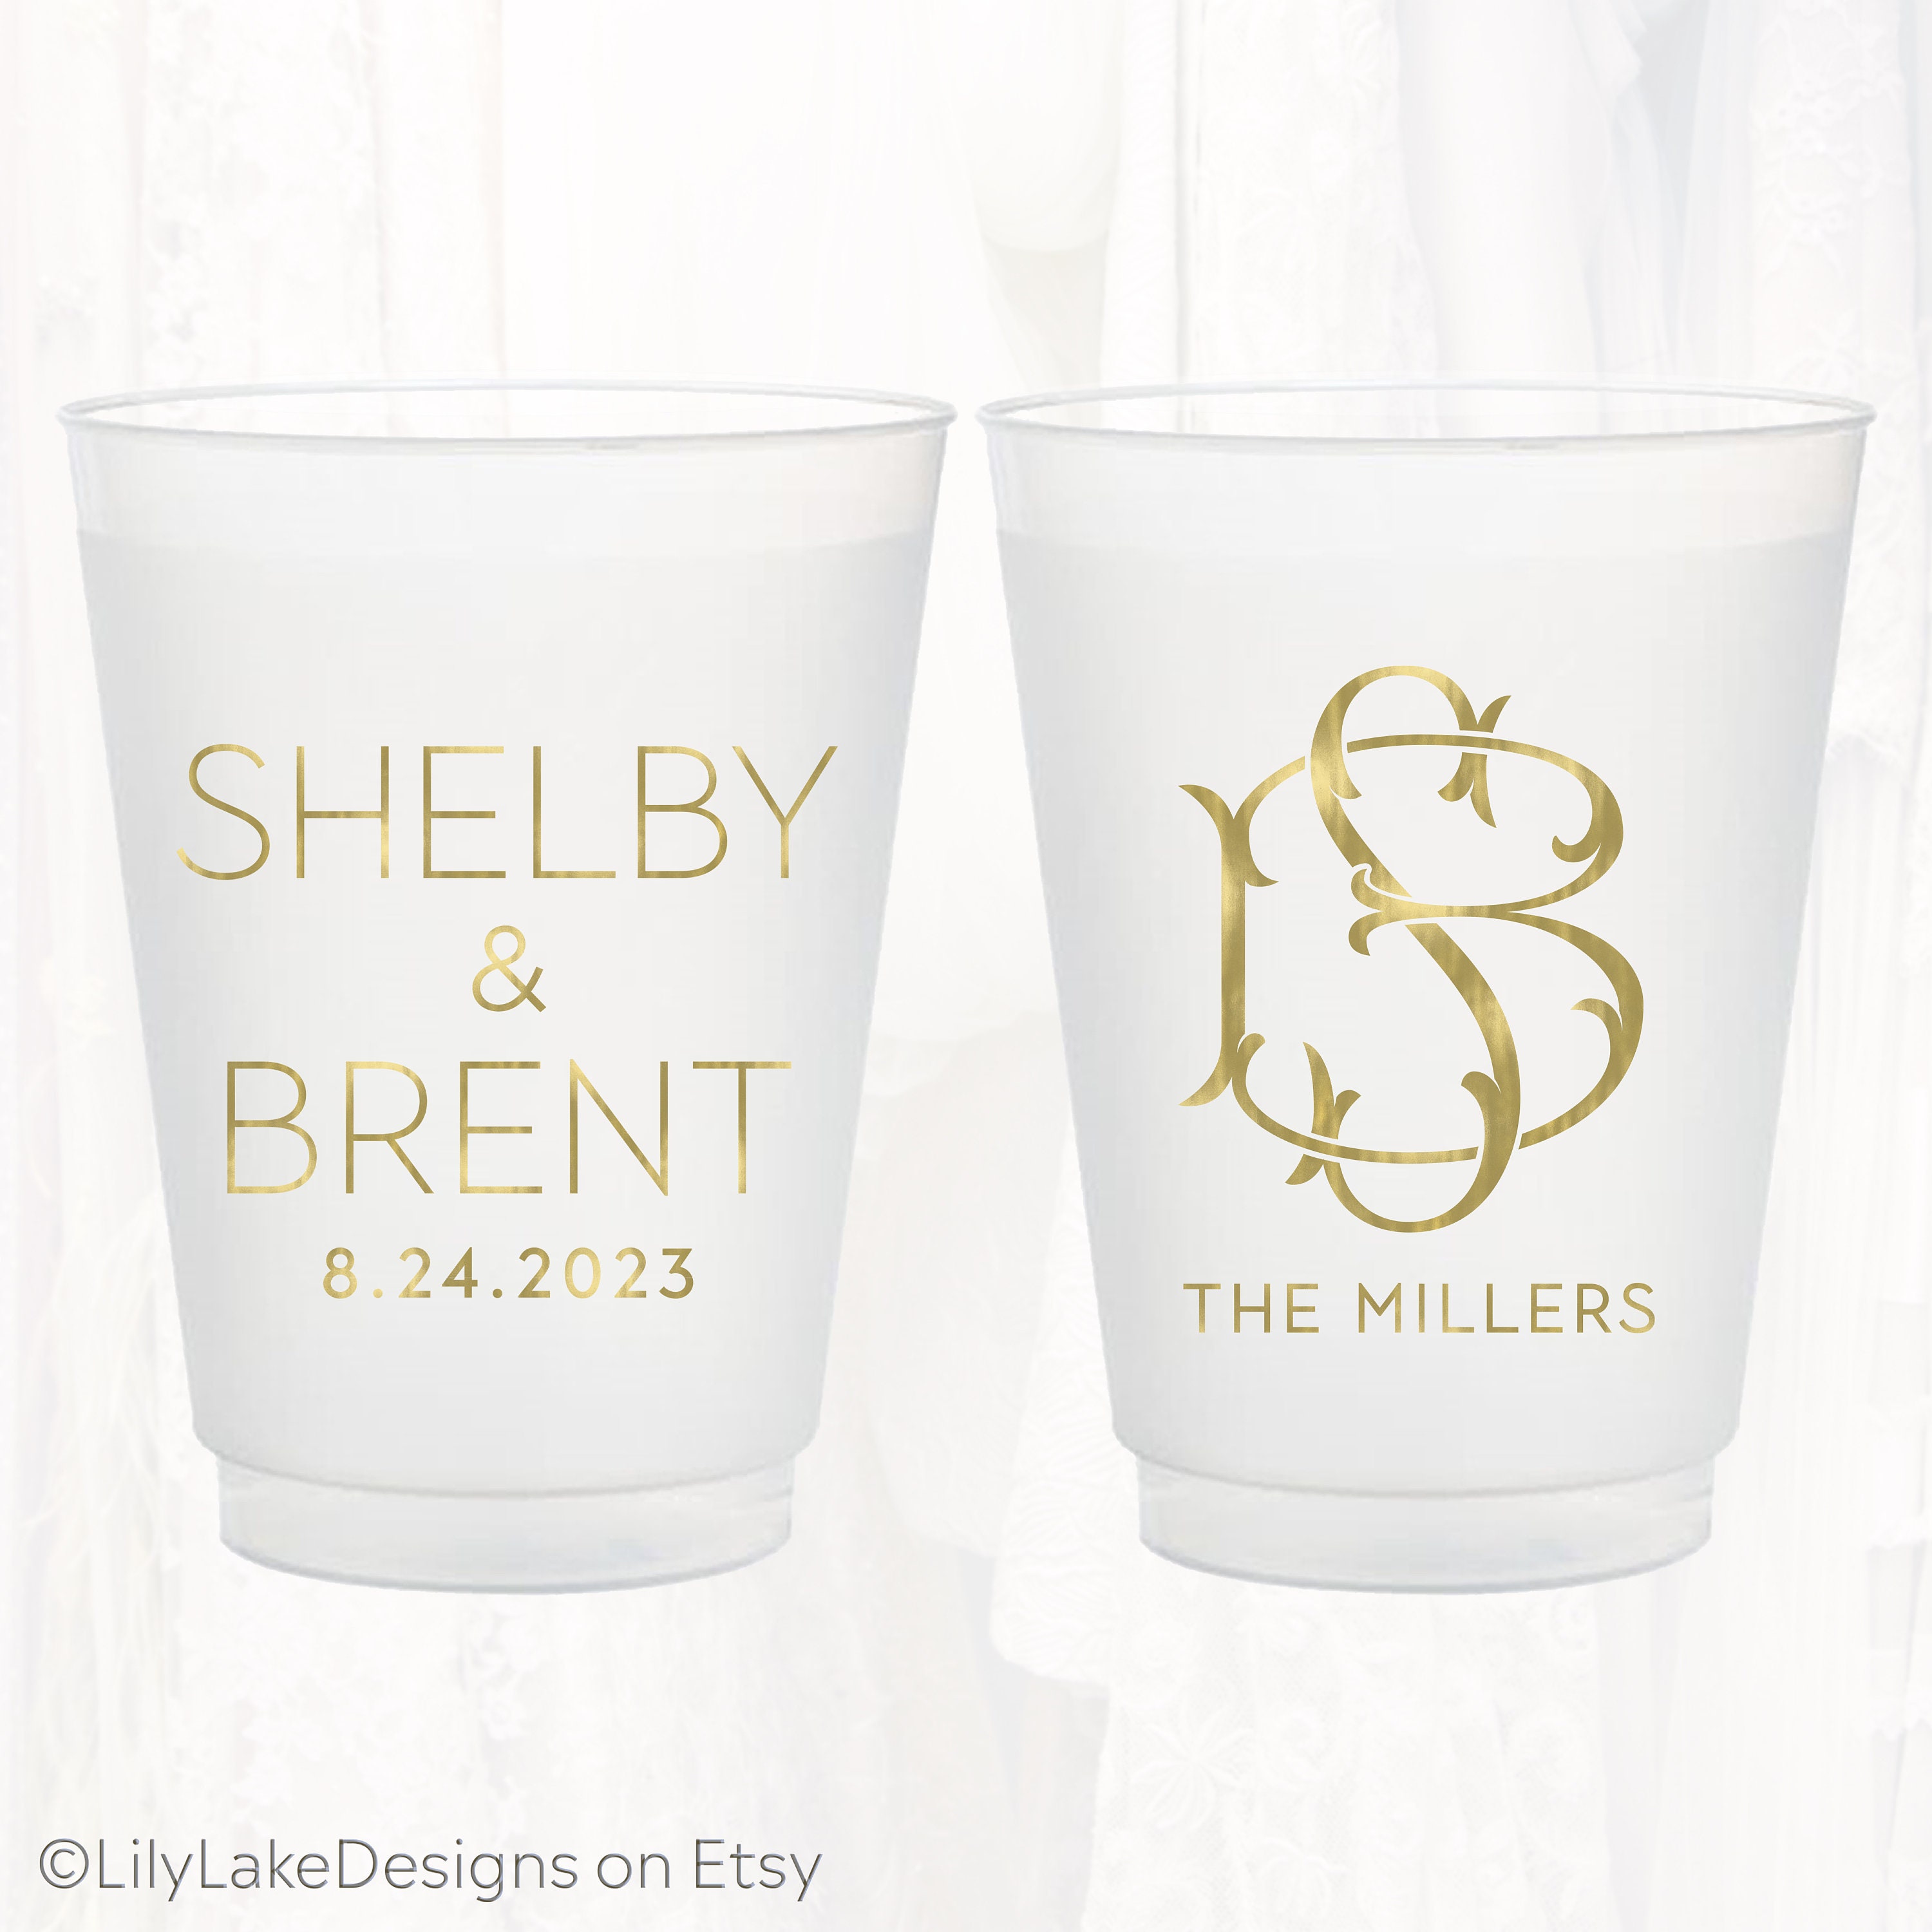 Personalized Wedding Frosted Cups, 16oz Plastic Cup, Custom Wedding Favor,  I'll Drink to That, Monogrammed, Shatterproof Party Favor, DTT401 